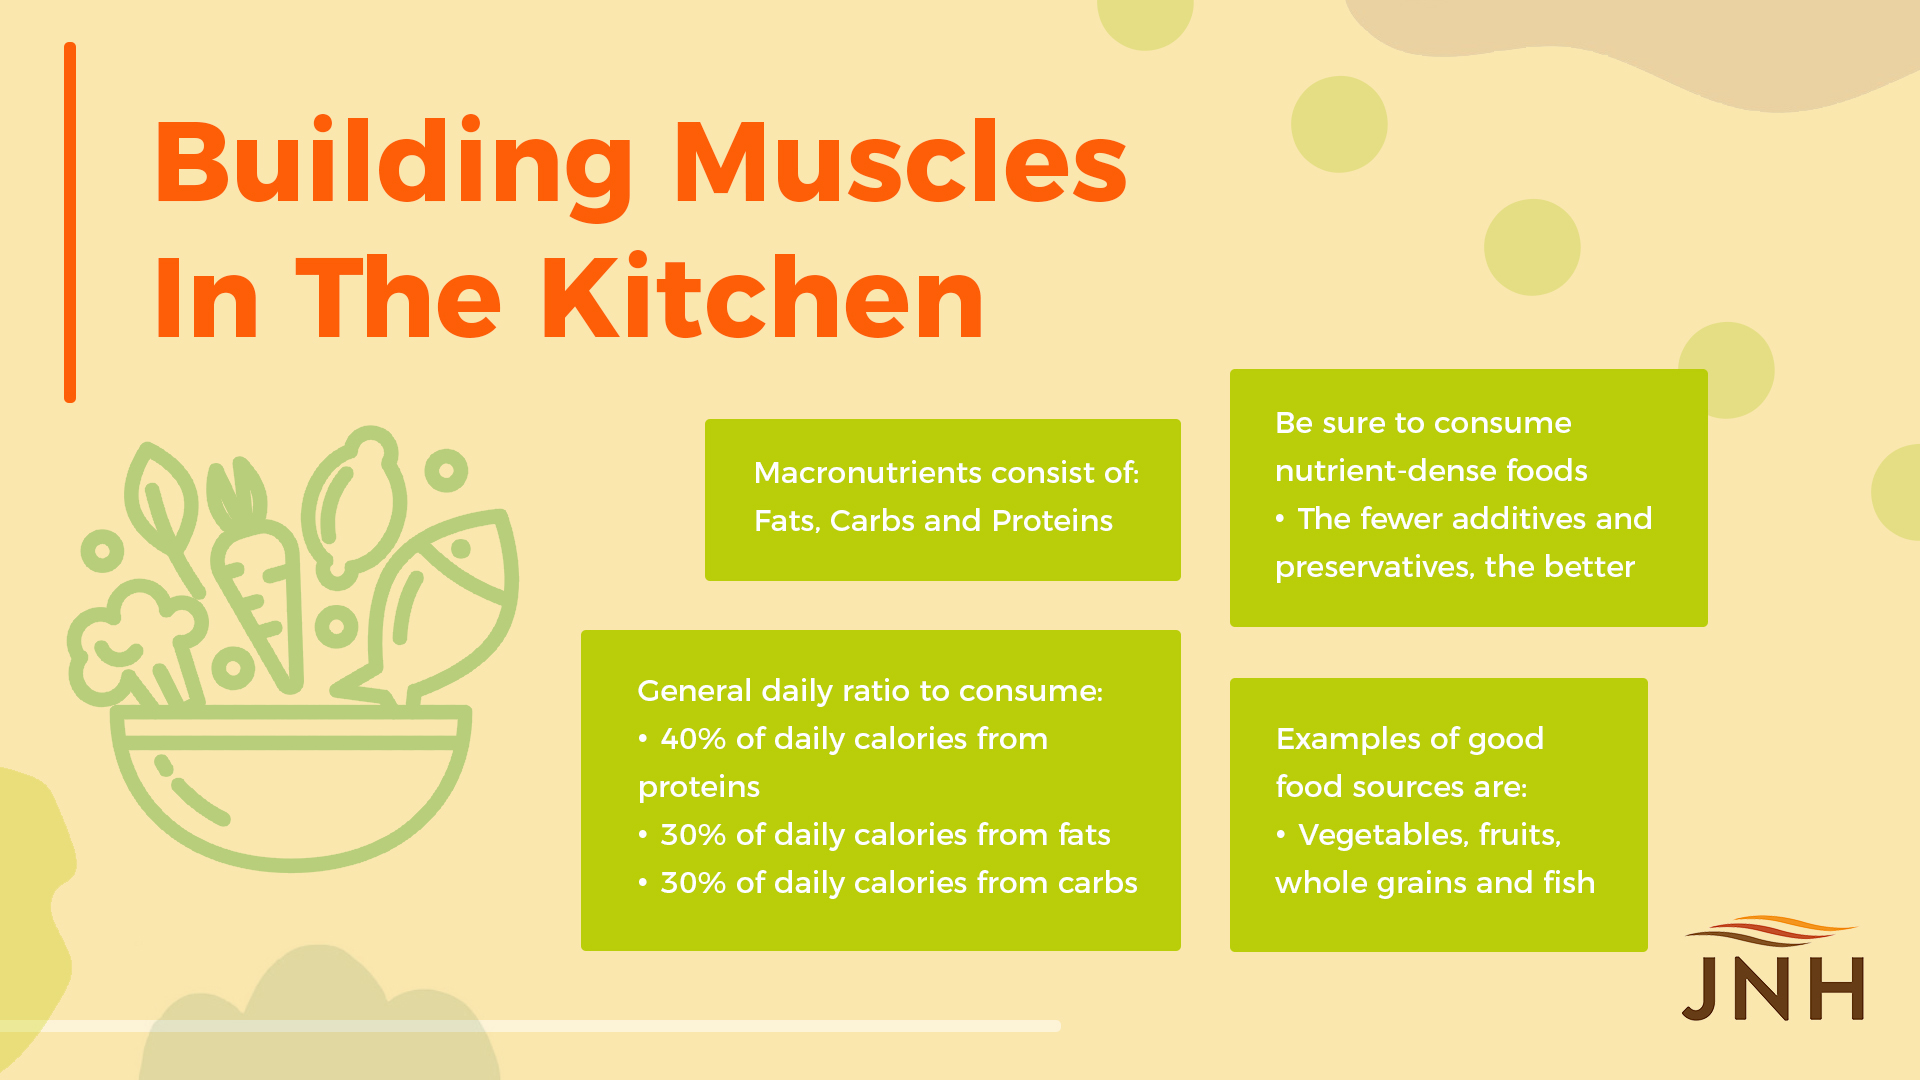 Building Muscles in the Kitchen: Macronutrients consist of: Fats, Carbs and Proteins; General daily ratio to consume: 40% of daily calories from proteins, 30% of daily calories from fats, 30% of daily calories from carbs; Be sure to consume nutrient-dense foods; The fewer additives and preservatives, the better; Examples of good food sources are: Vegetables, fruits, whole grains and fish